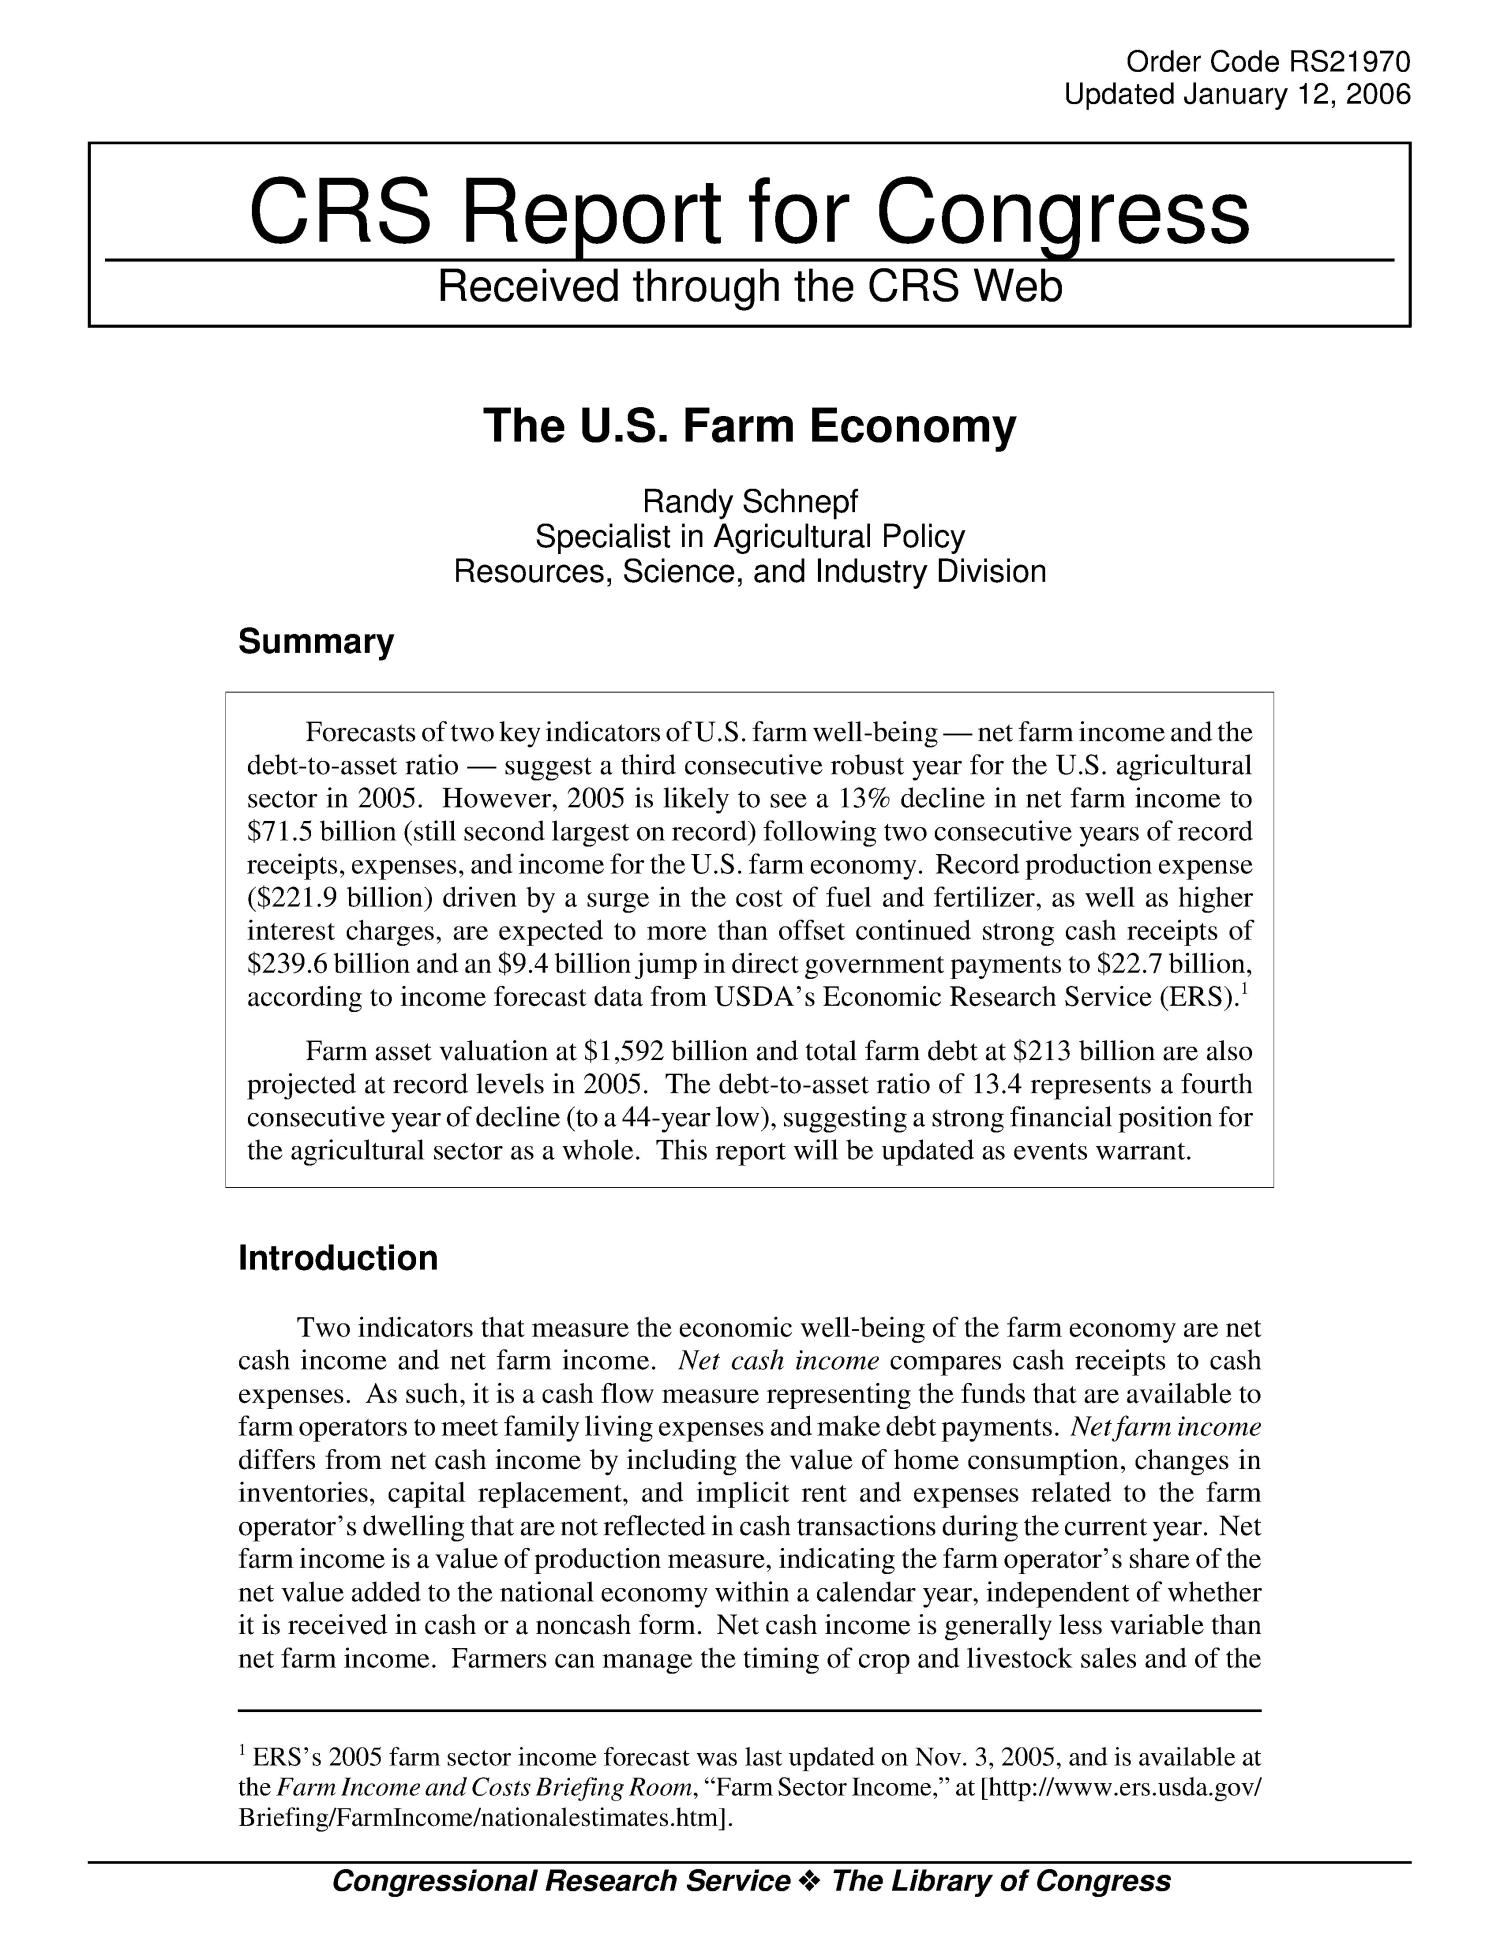 The U.S. Farm Economy
                                                
                                                    [Sequence #]: 1 of 6
                                                